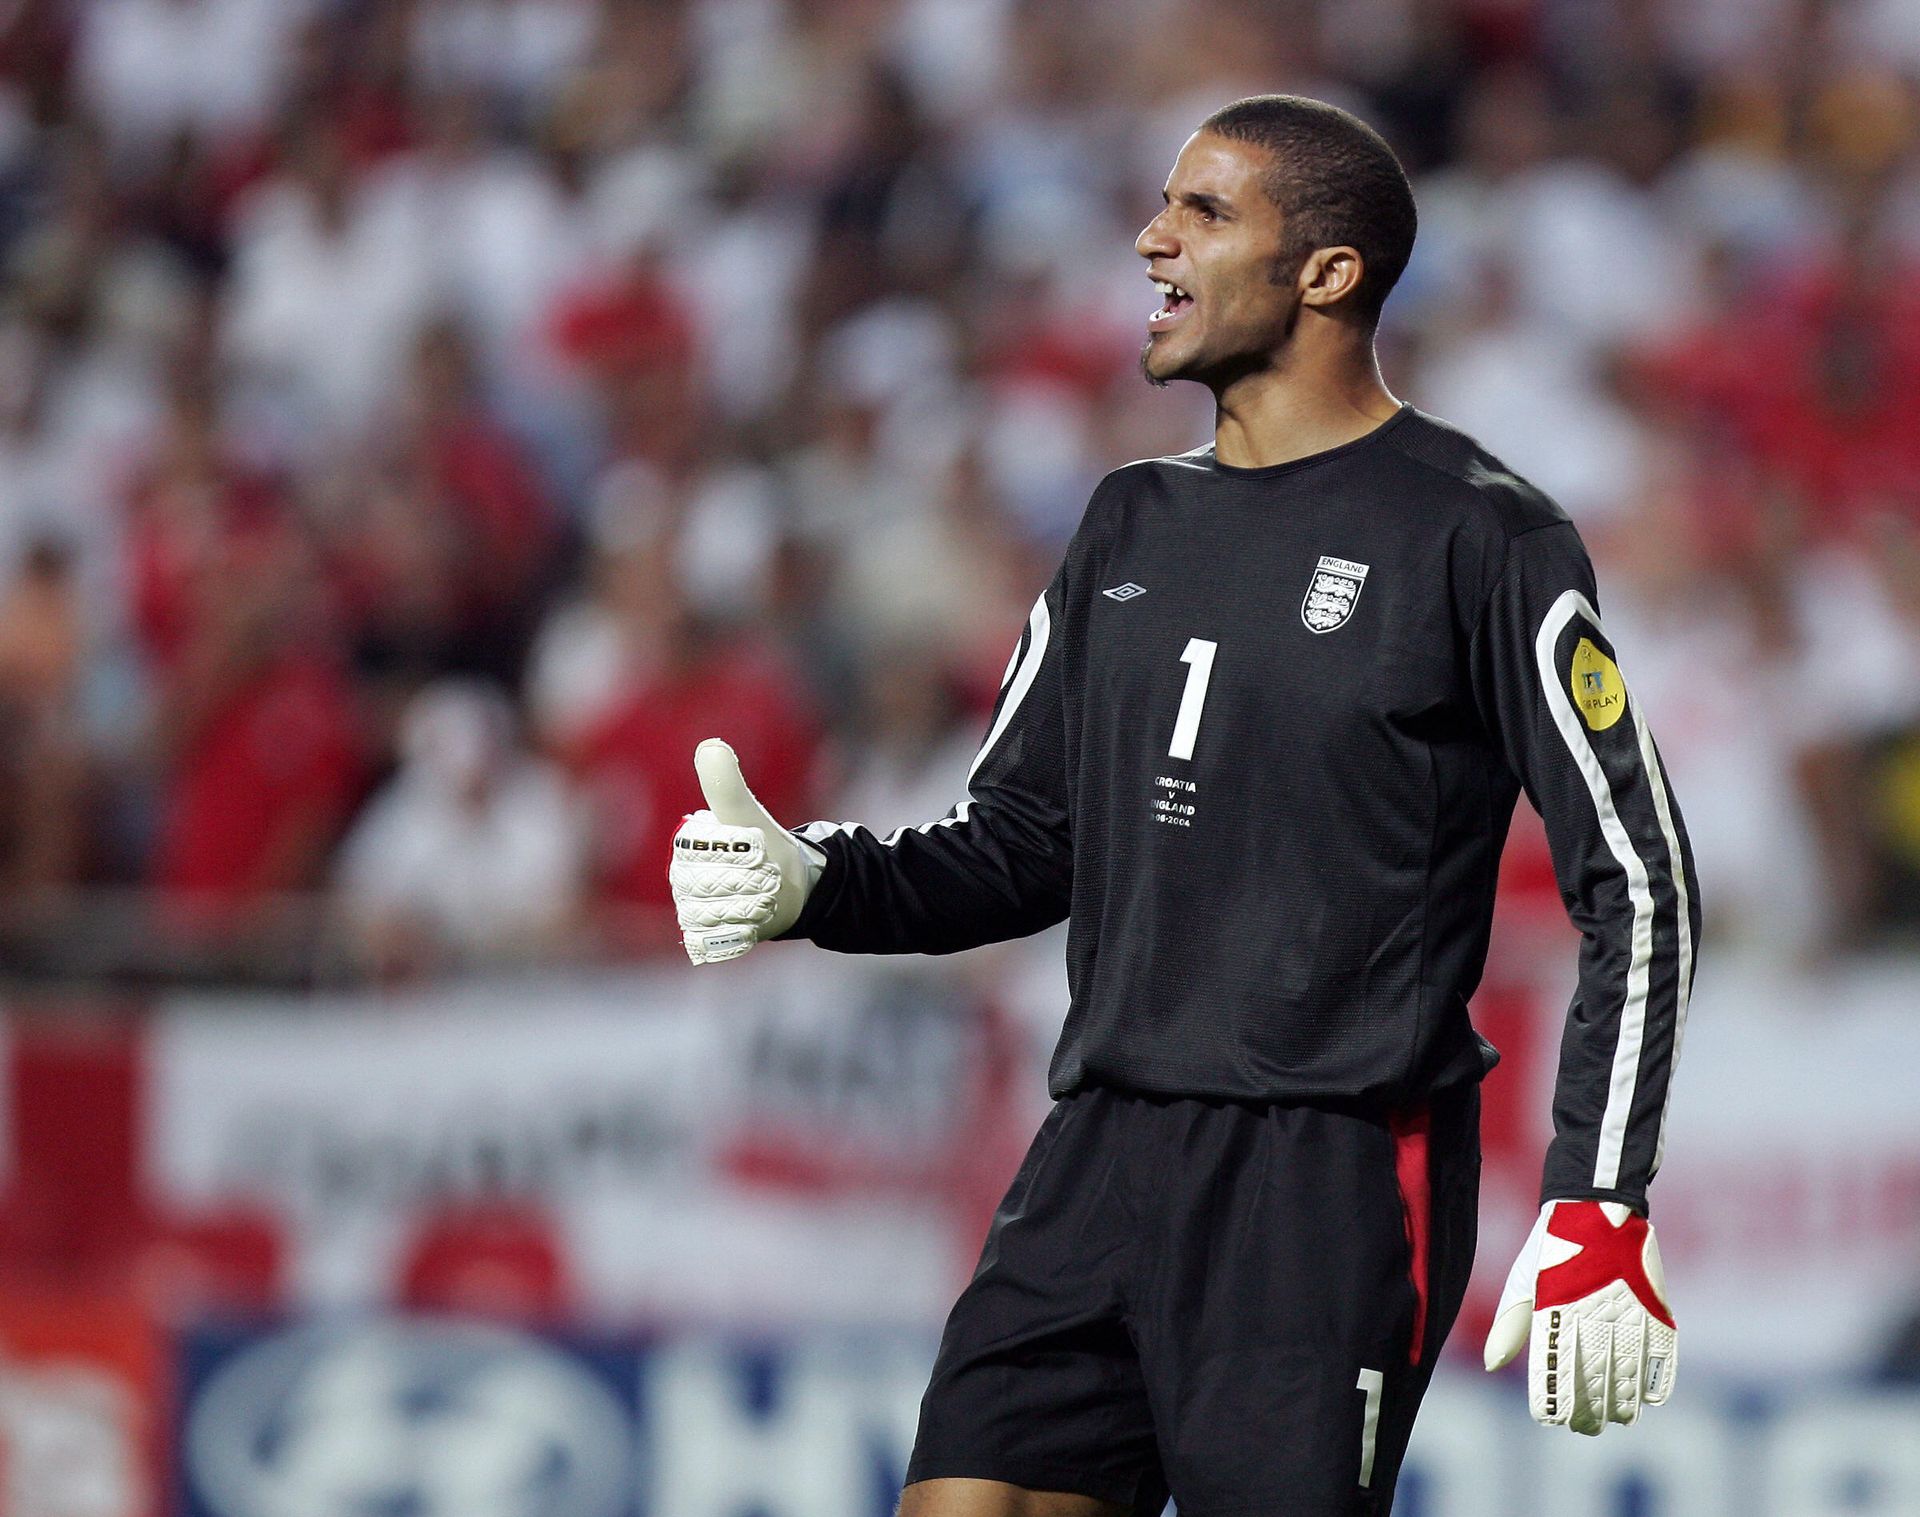 <p>                     David James won 53 caps for England between 1997 and 2010 and became a better goalkeeper in the latter part of his career.                   </p>                                      <p>                     A starter at Euro 2004, he became the oldest World Cup debutant in 2010 at the age of almost 40 years old. He played for Aston Villa, West Ham, Manchester City and Portsmouth in the 2000s, helping the latter win the FA Cup in 2008.                   </p>